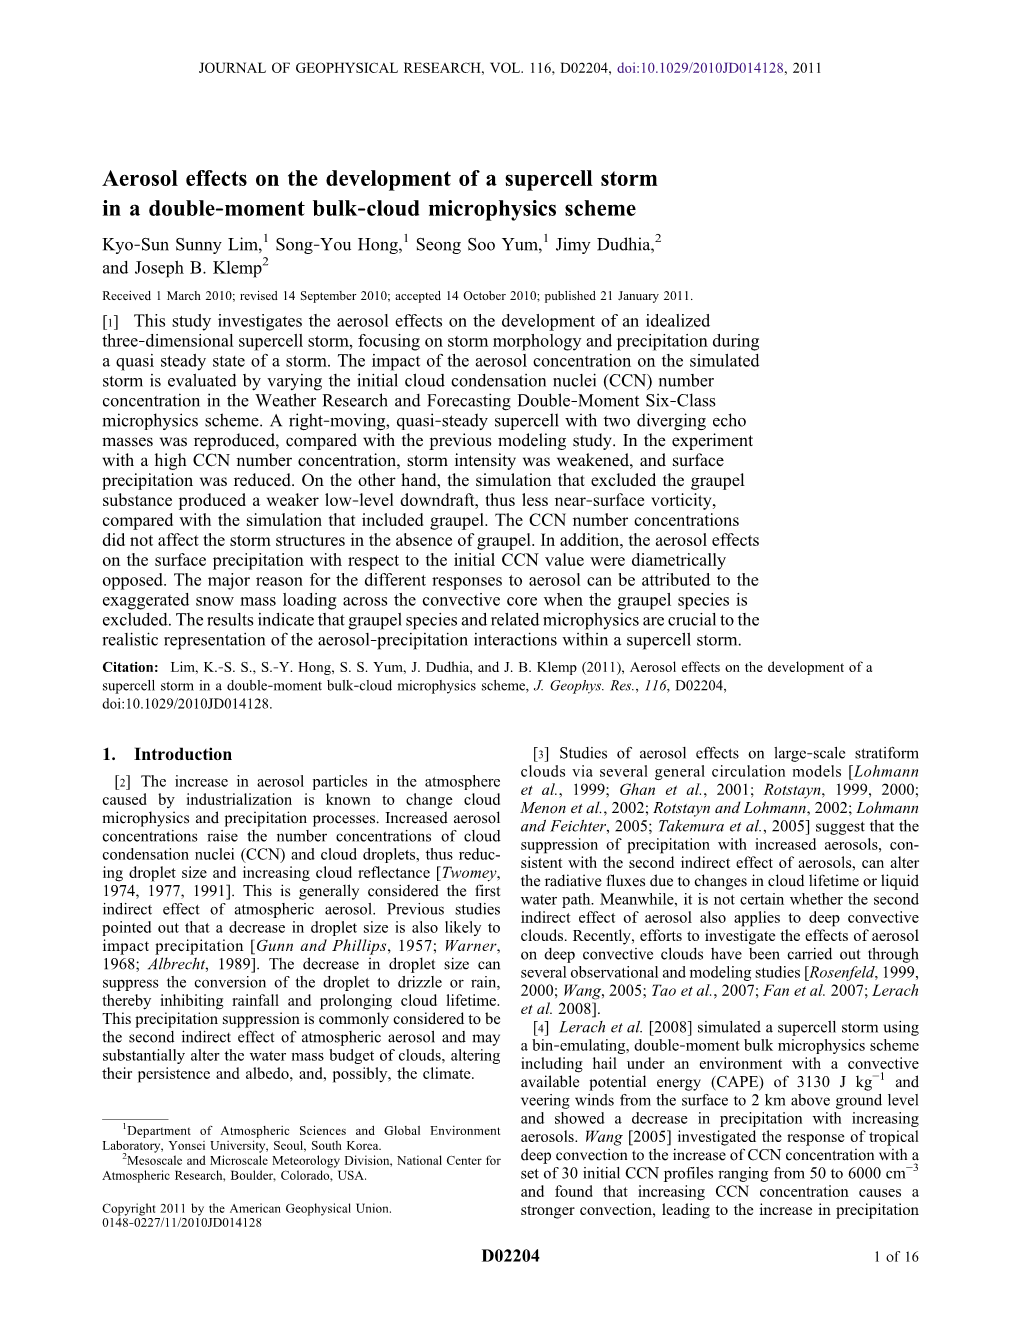 Aerosol Effects on the Development of a Supercell Storm in a Double